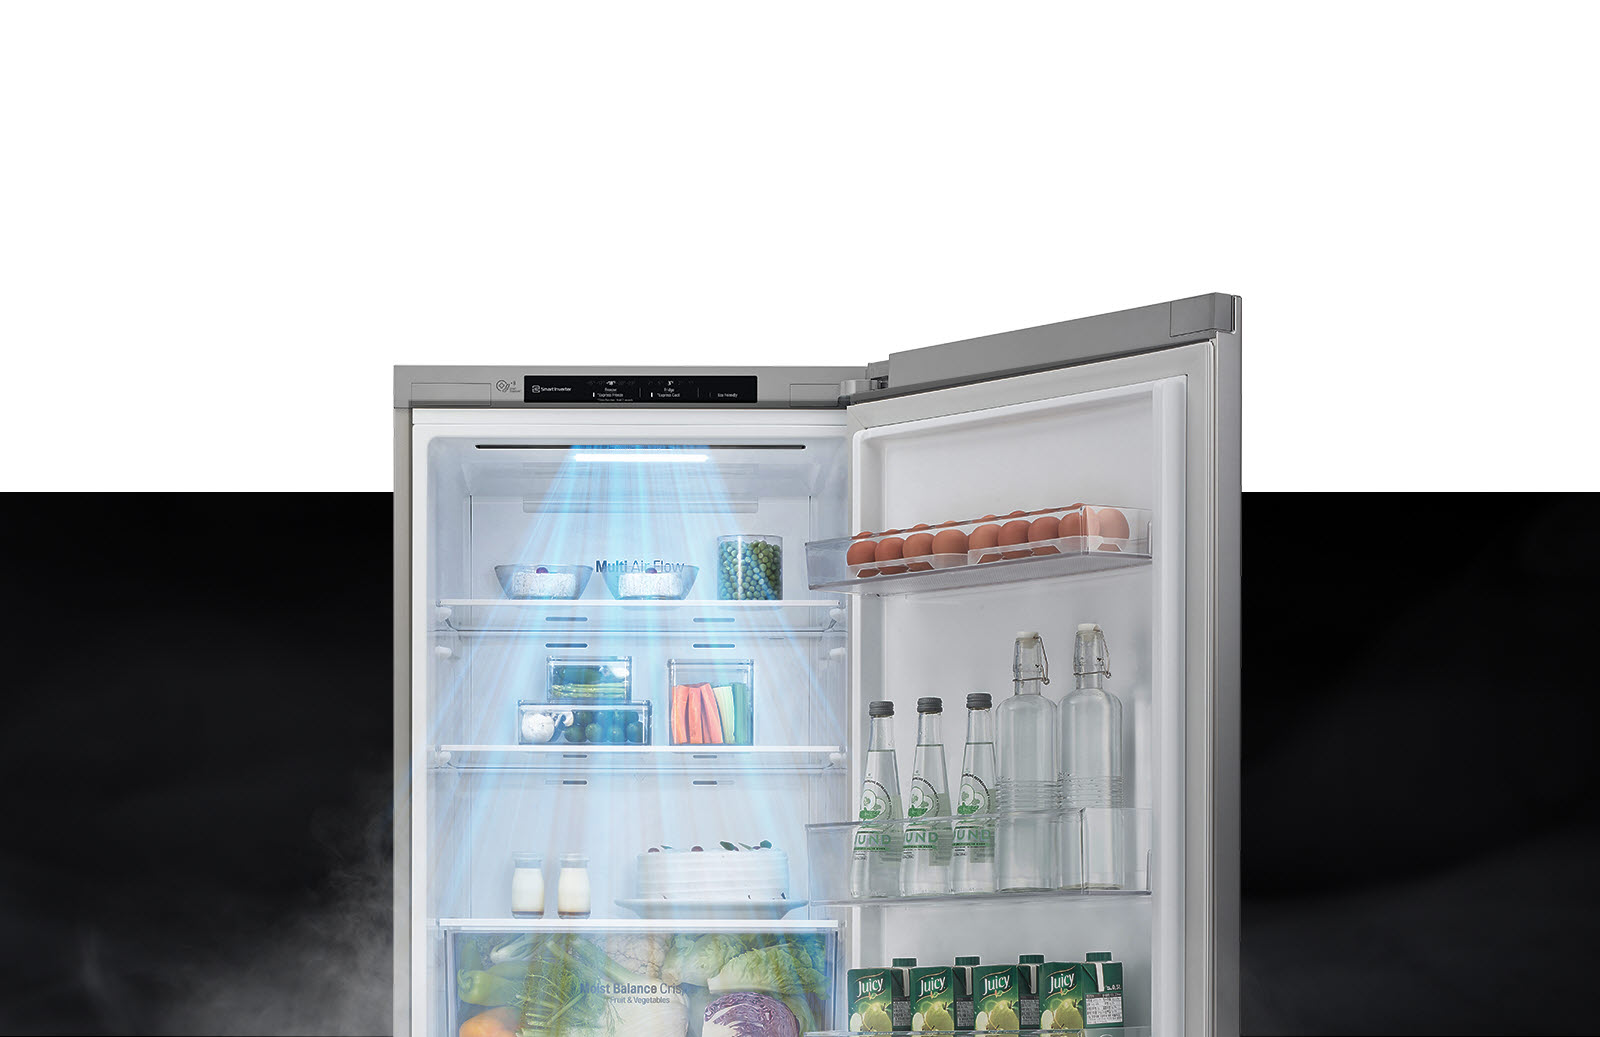 The top half of the refrigerator is shown with the door open. Inside, the shelves are filled with produce and drinks and a gust of wind comes down from the top to cool off the food.